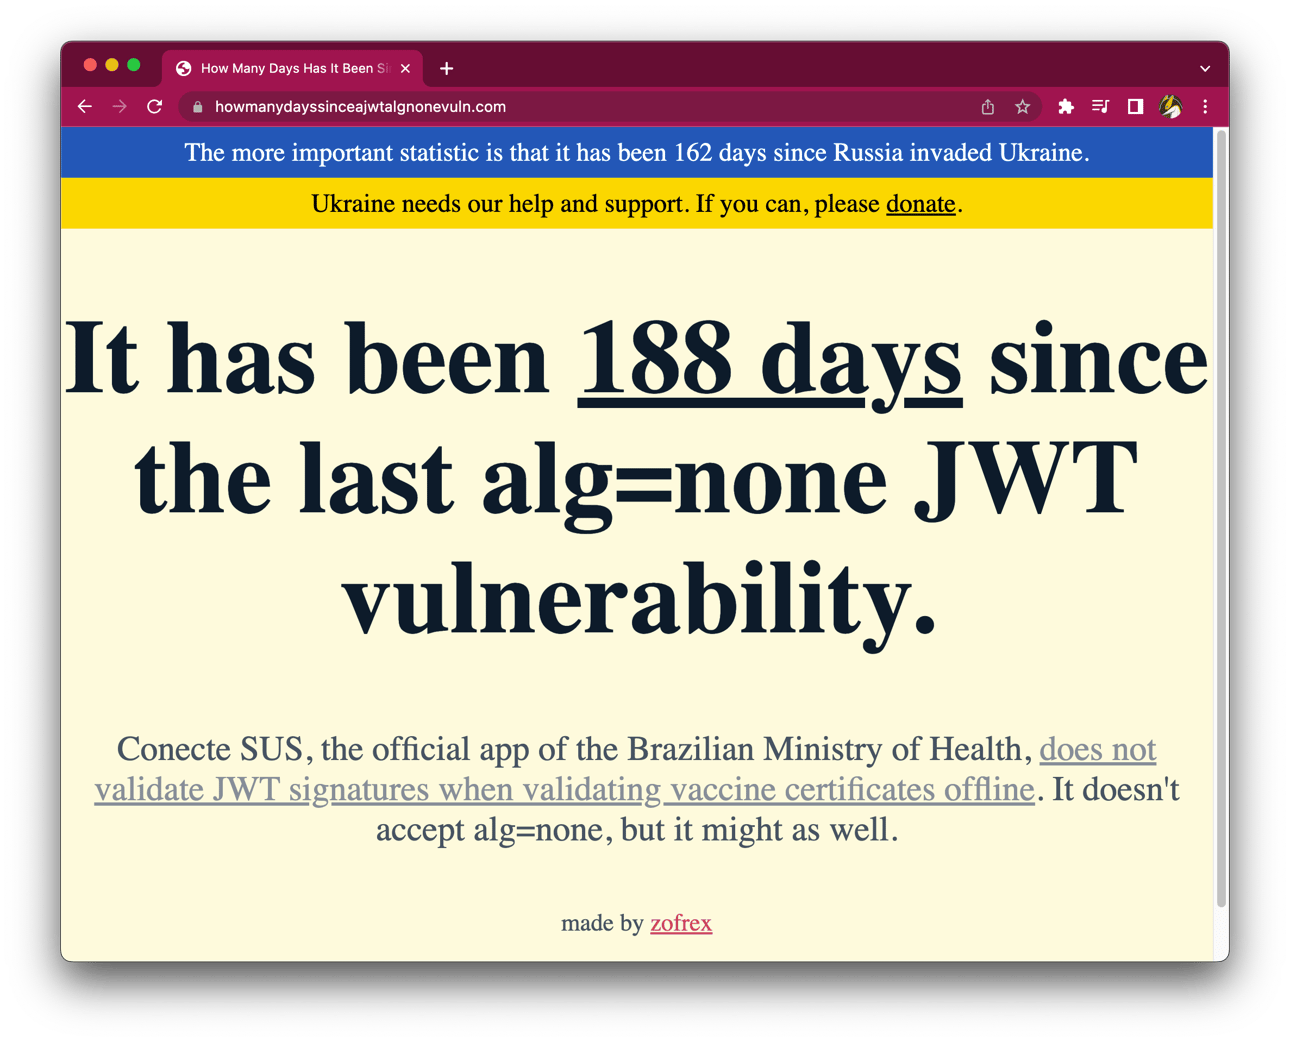 A screenshot of the website 'how many days since a jwt alg none vulnerability' it reads 188 days. It soon got reset after this screenshot was taken.